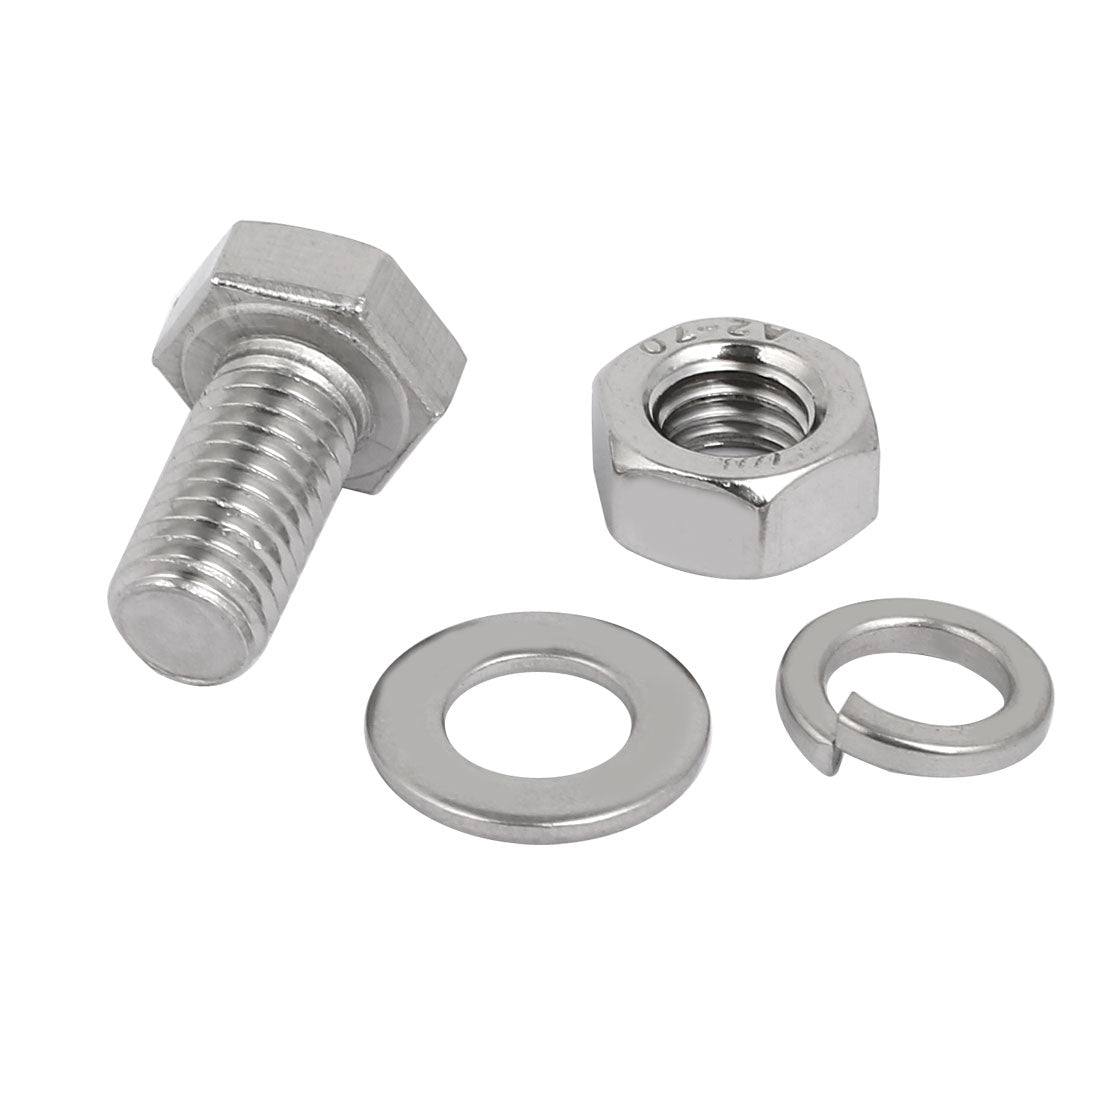 uxcell Uxcell 20 Set M8x20mm 304 Stainless Steel Hex Bolts w Nuts and Washers Assortment Kit